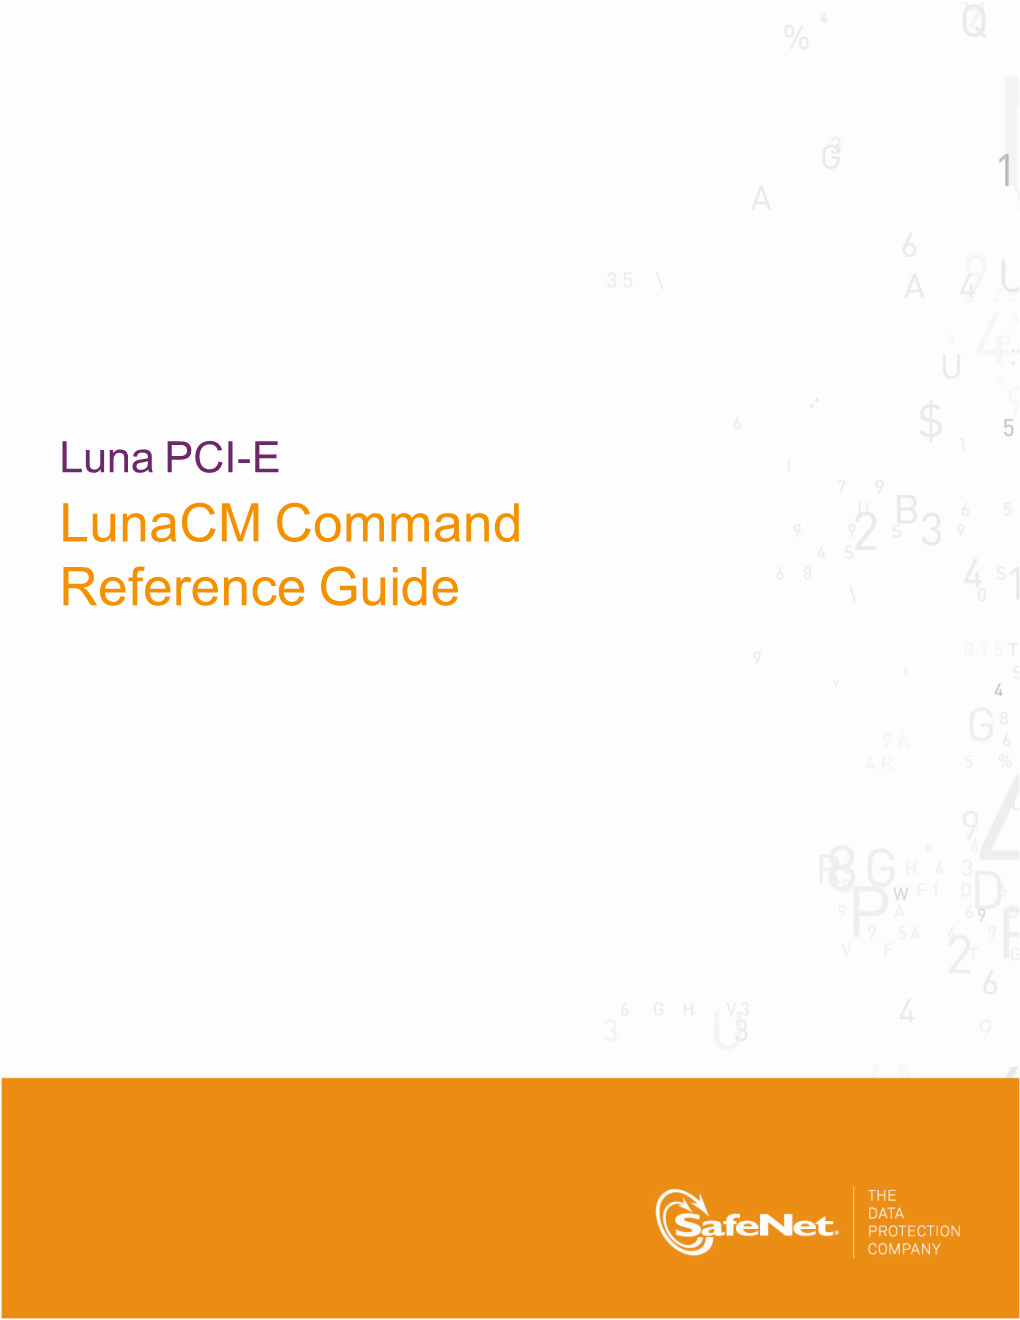 Lunacm Command Reference Guide Document Information